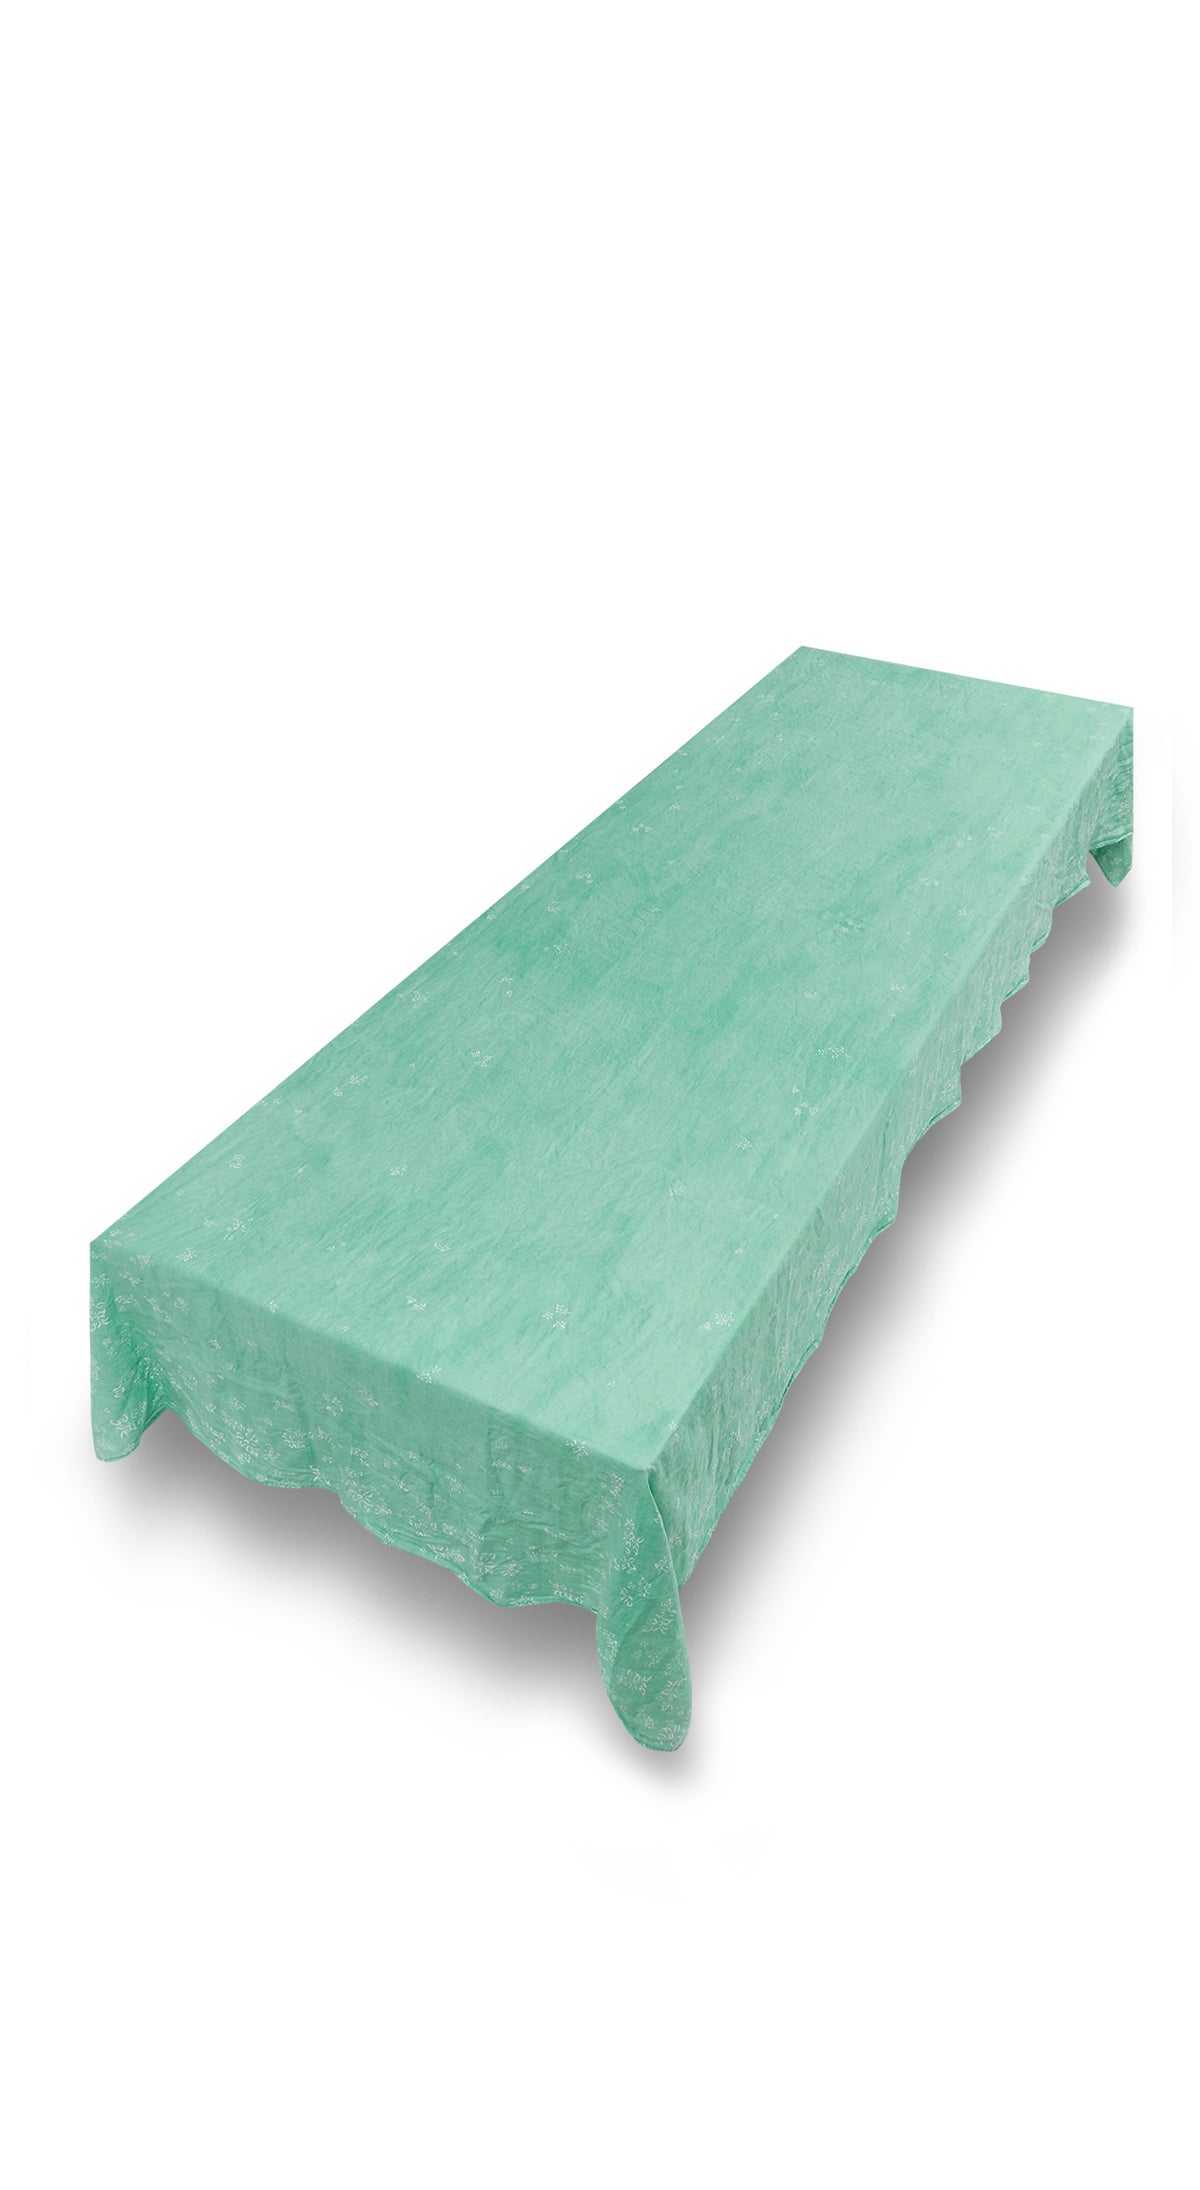 S&Bee Linen Tablecloth in Celadon Blue